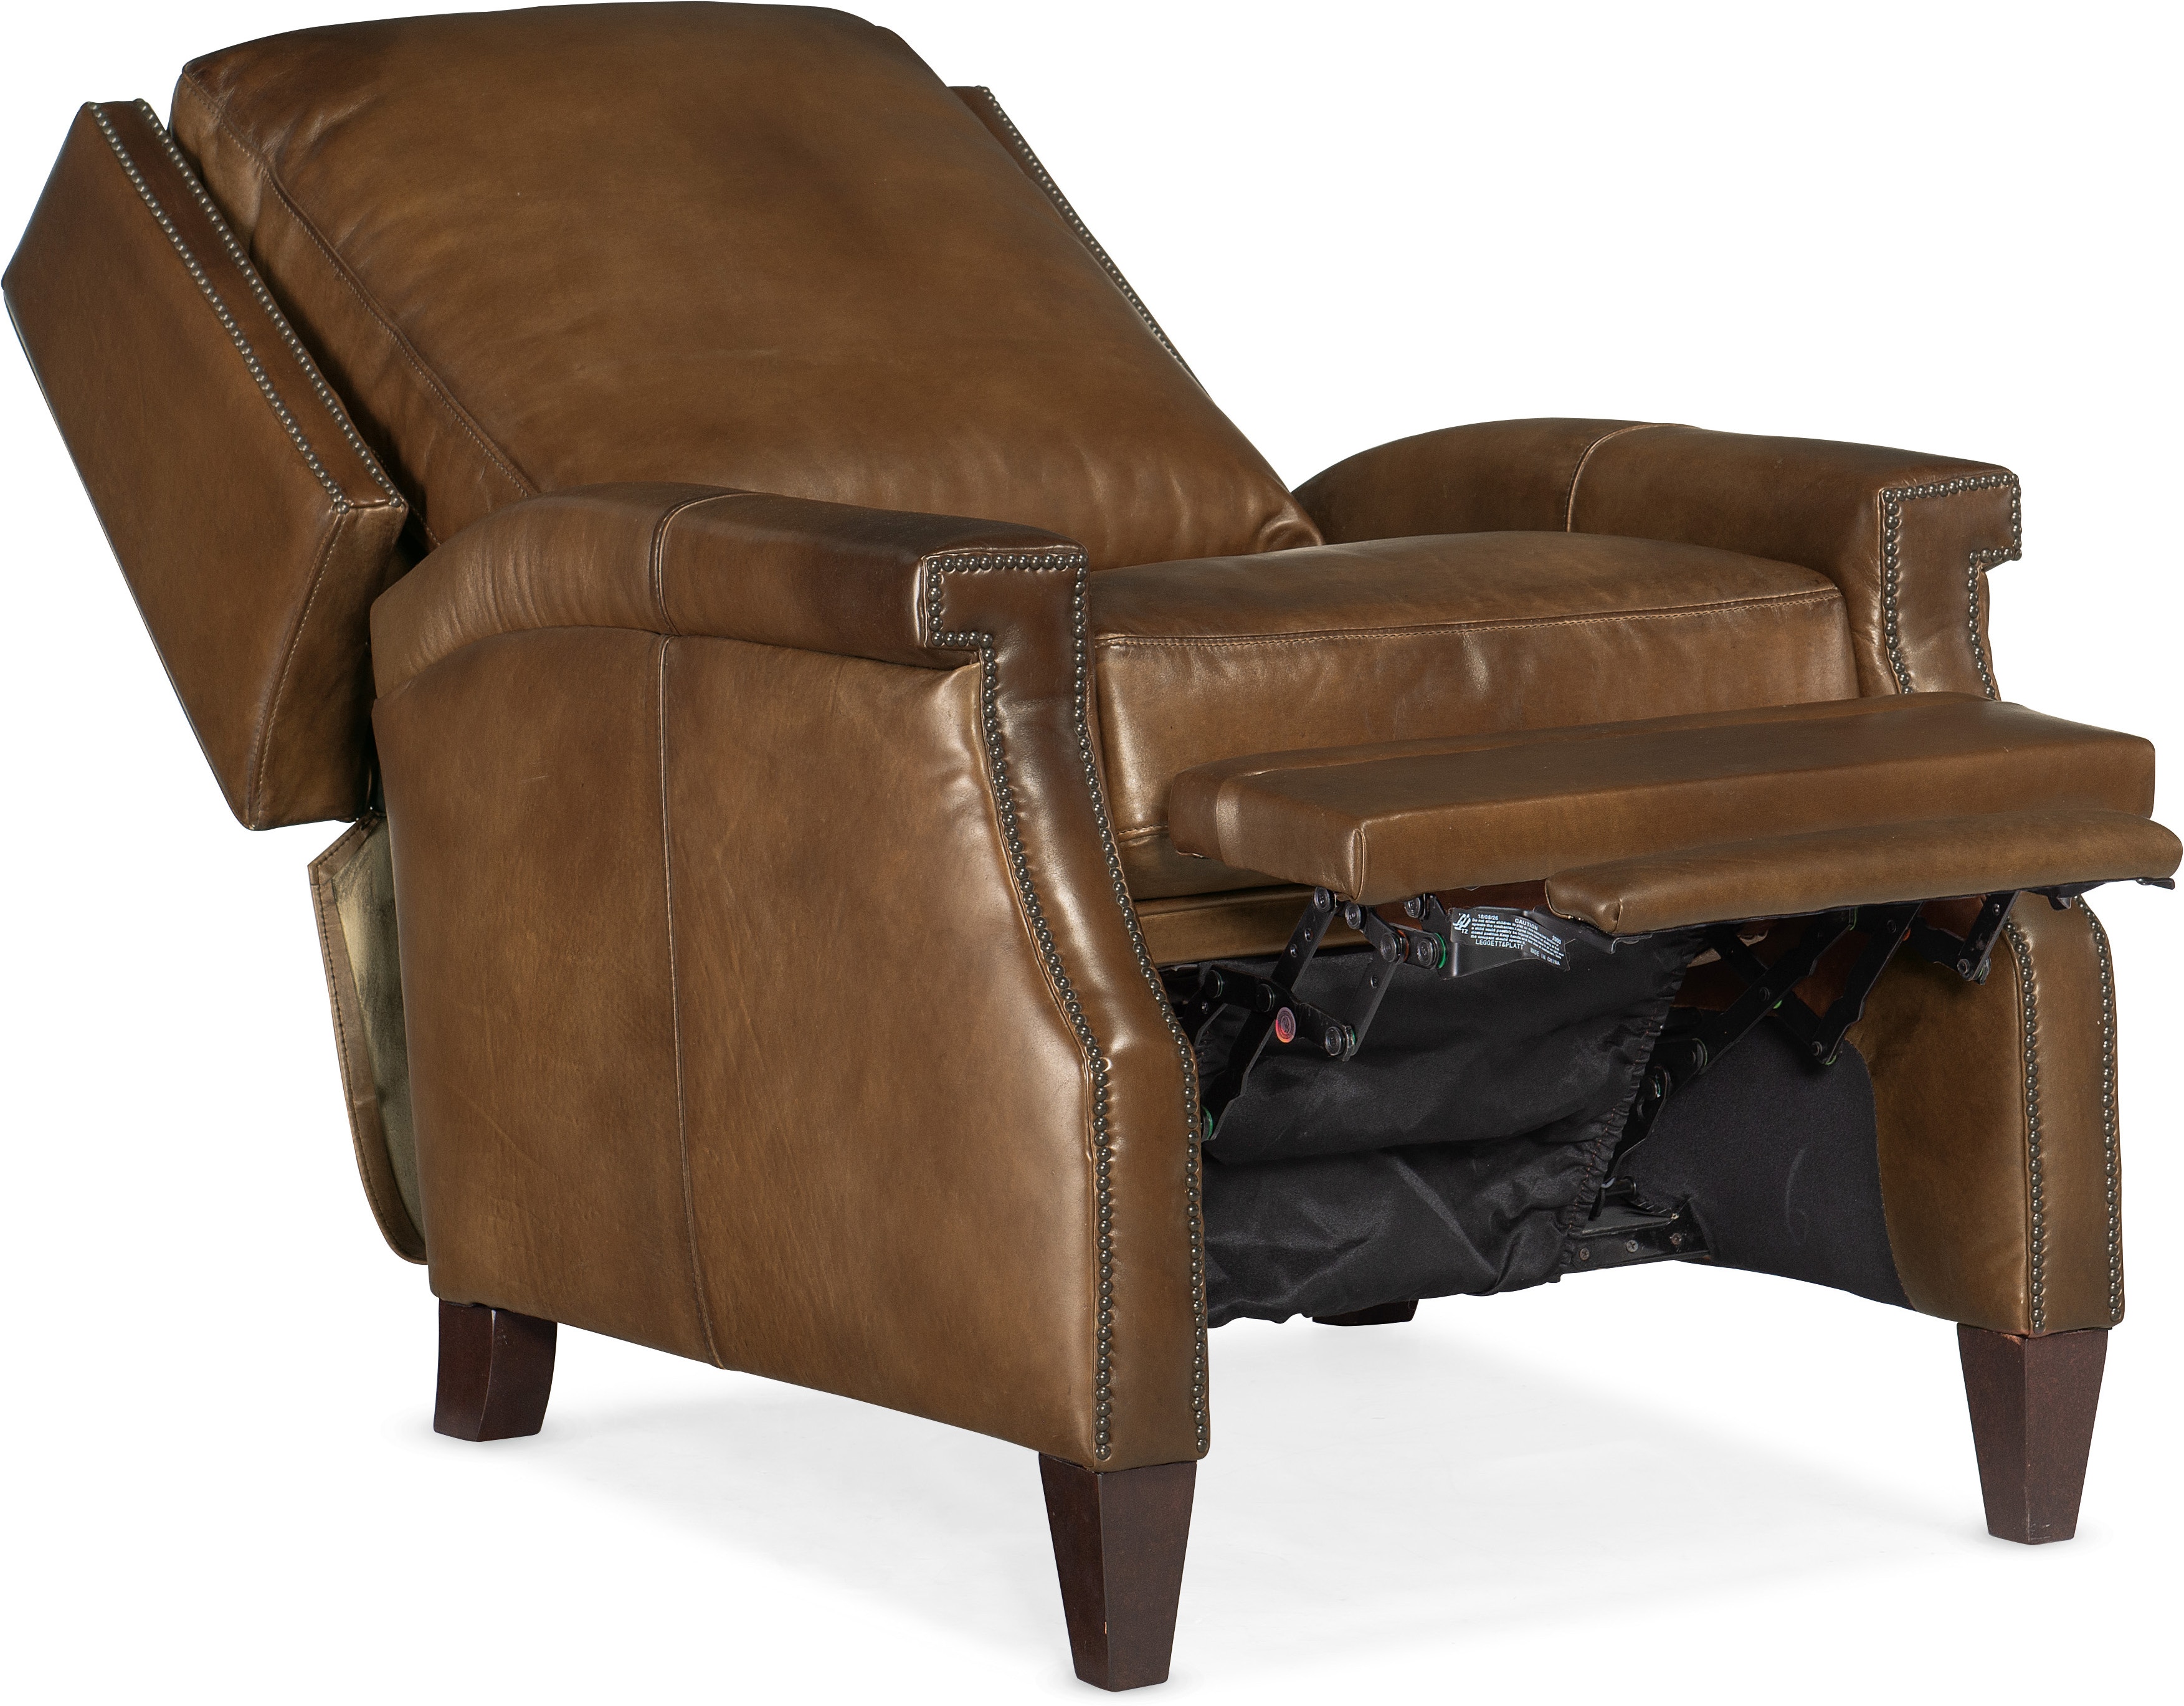 Hooker Furniture Reclining Chairs RC150-088 Traditional High Leg Reclining  Chair with Tufted Recliner, Gavigan's Home Furnishings